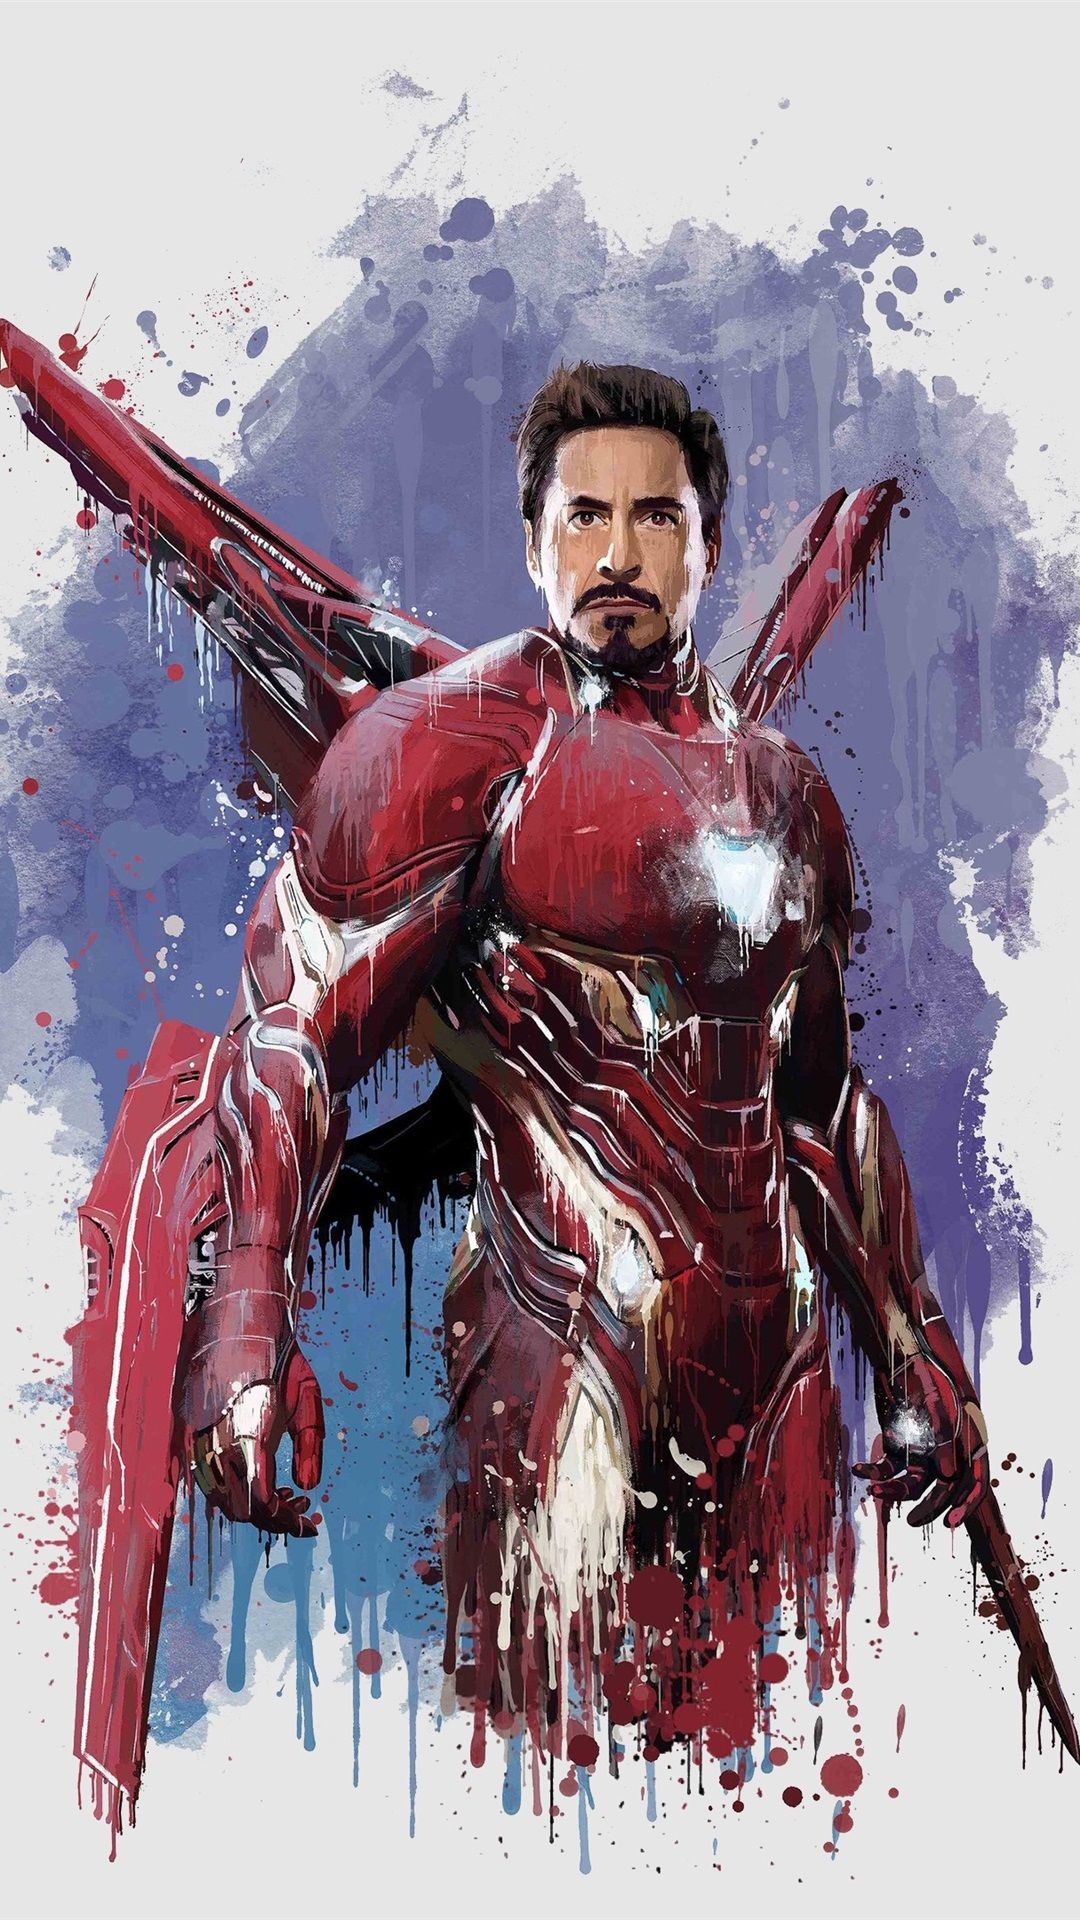 Iron Man, The Avengers: Infinity War, art picture 1080x1920 iPhone